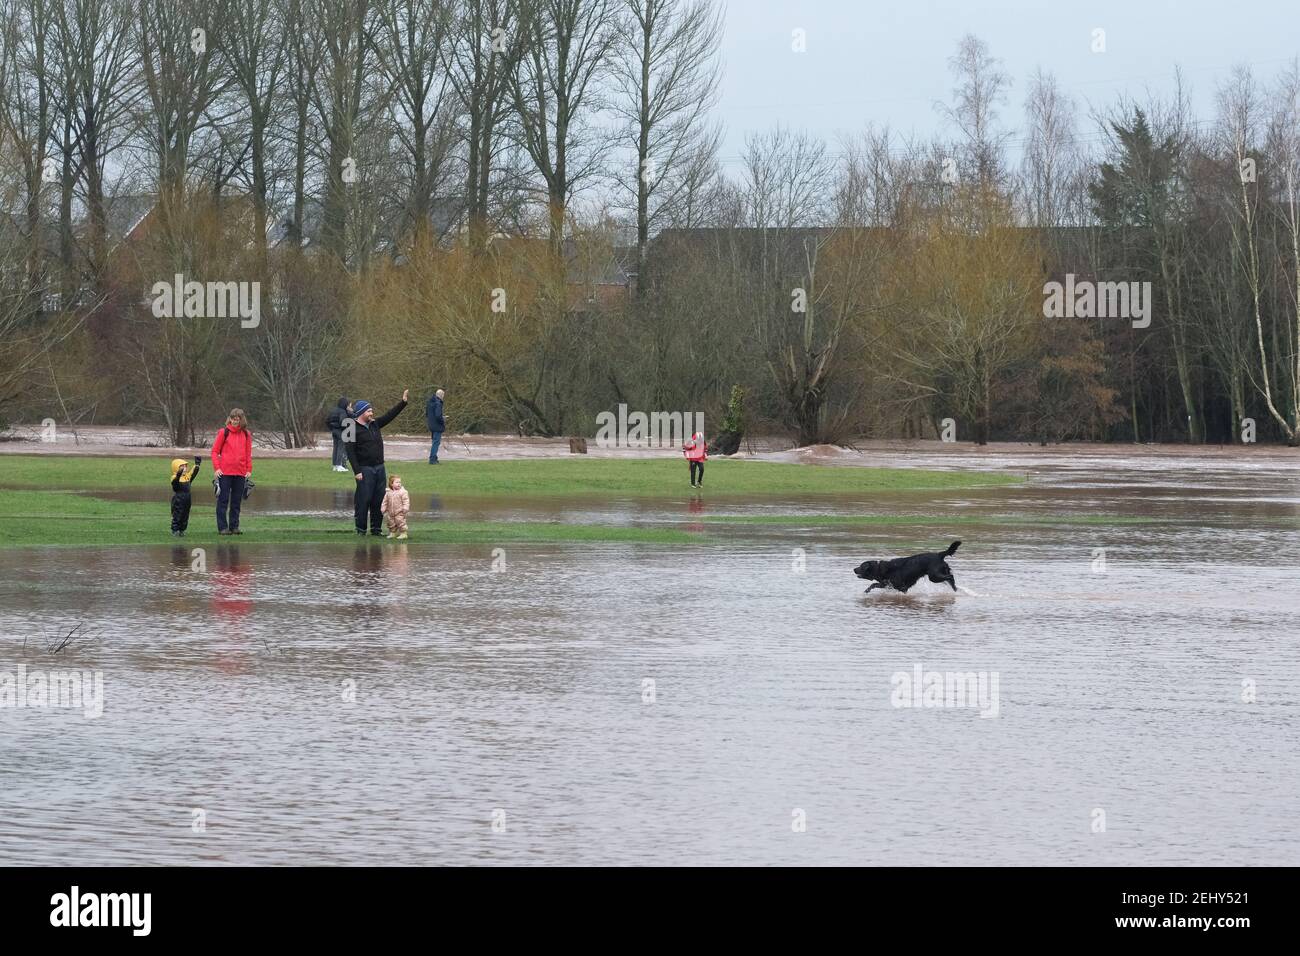 Abergavenny, Monmouthshire, Wales, UK - UK Weather - Saturday 20th February 2021 - People enjoying some lockdown exercise beside the flooded River Usk. The River Usk is now in fast flow and has started to overflow its banks after heavy rain over the past 24 hours in south Wales. The forecast is for more rain. Photo Steven May / Alamy Live News Stock Photo